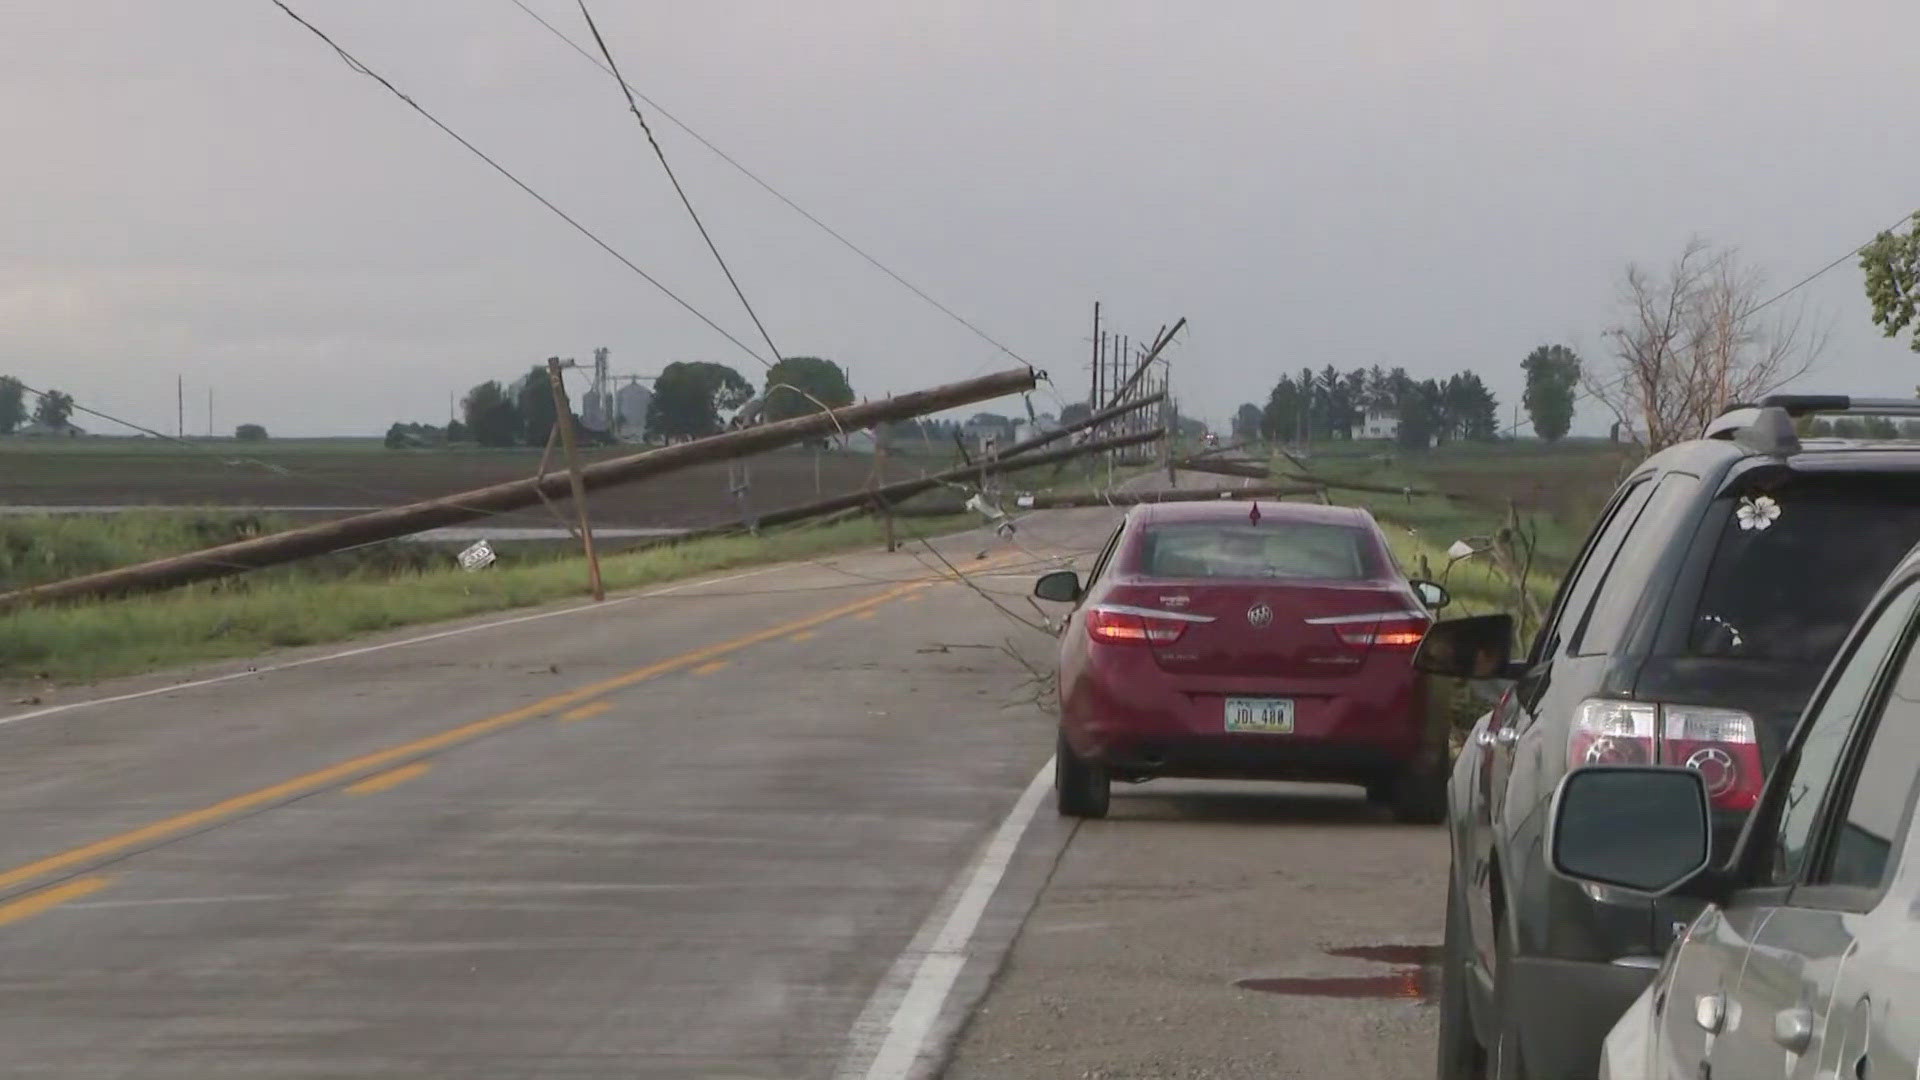 Just east of Newton, Iowa, severe weather downed poles, caused a semi-truck to crash and damaged homes.